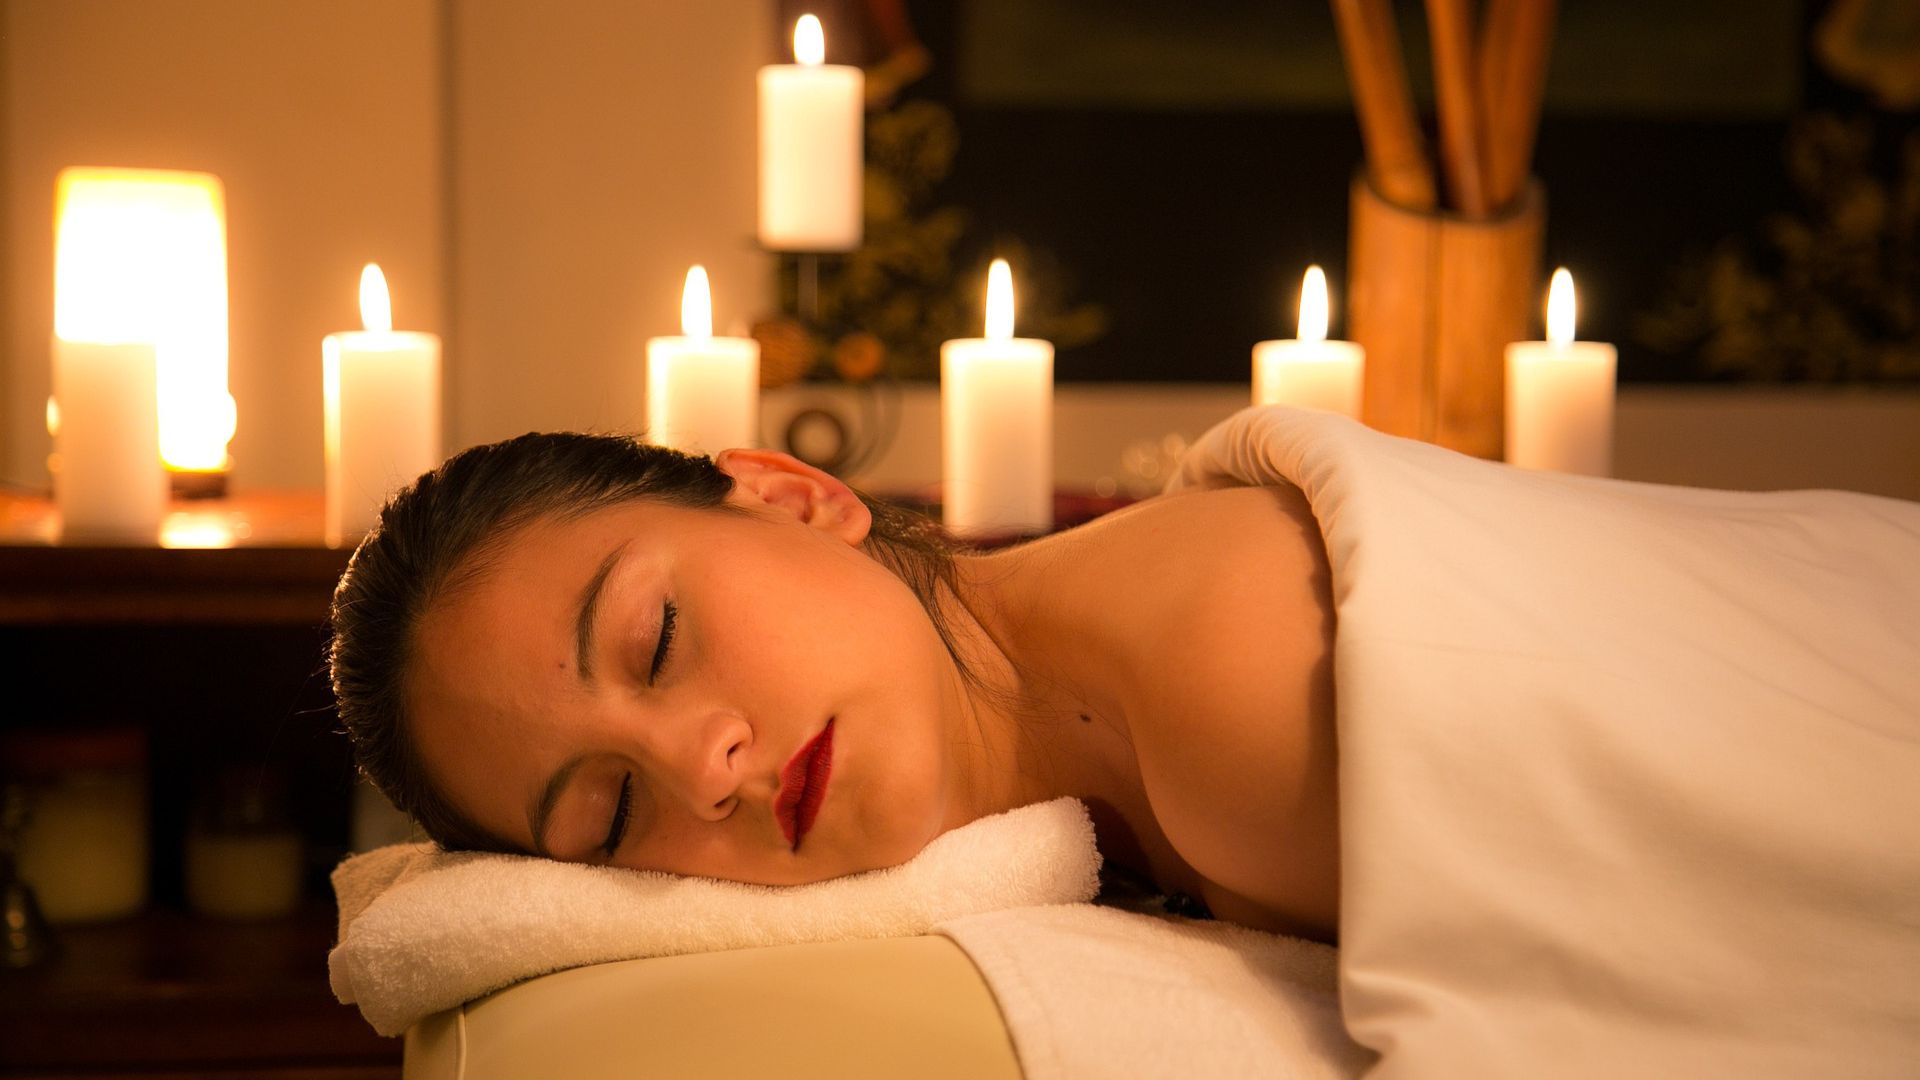 A woman getting a massage surrounded by candles